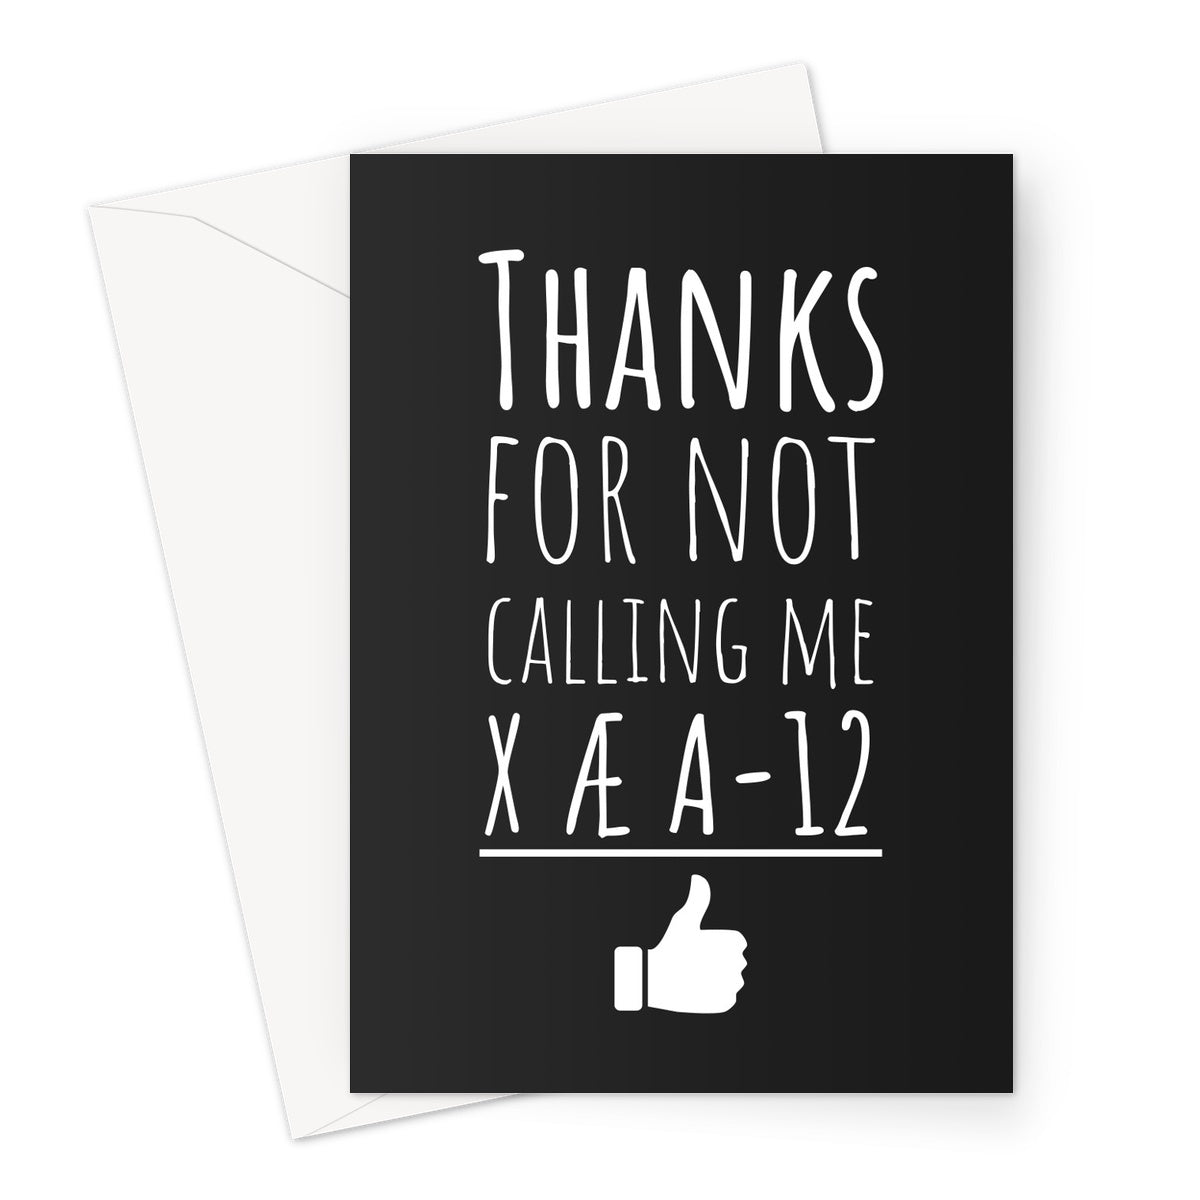 Thanks For Not Calling Me X AE A 12 Father's Day Dad Funny Meme Elon Musk Baby Name  Greeting Card